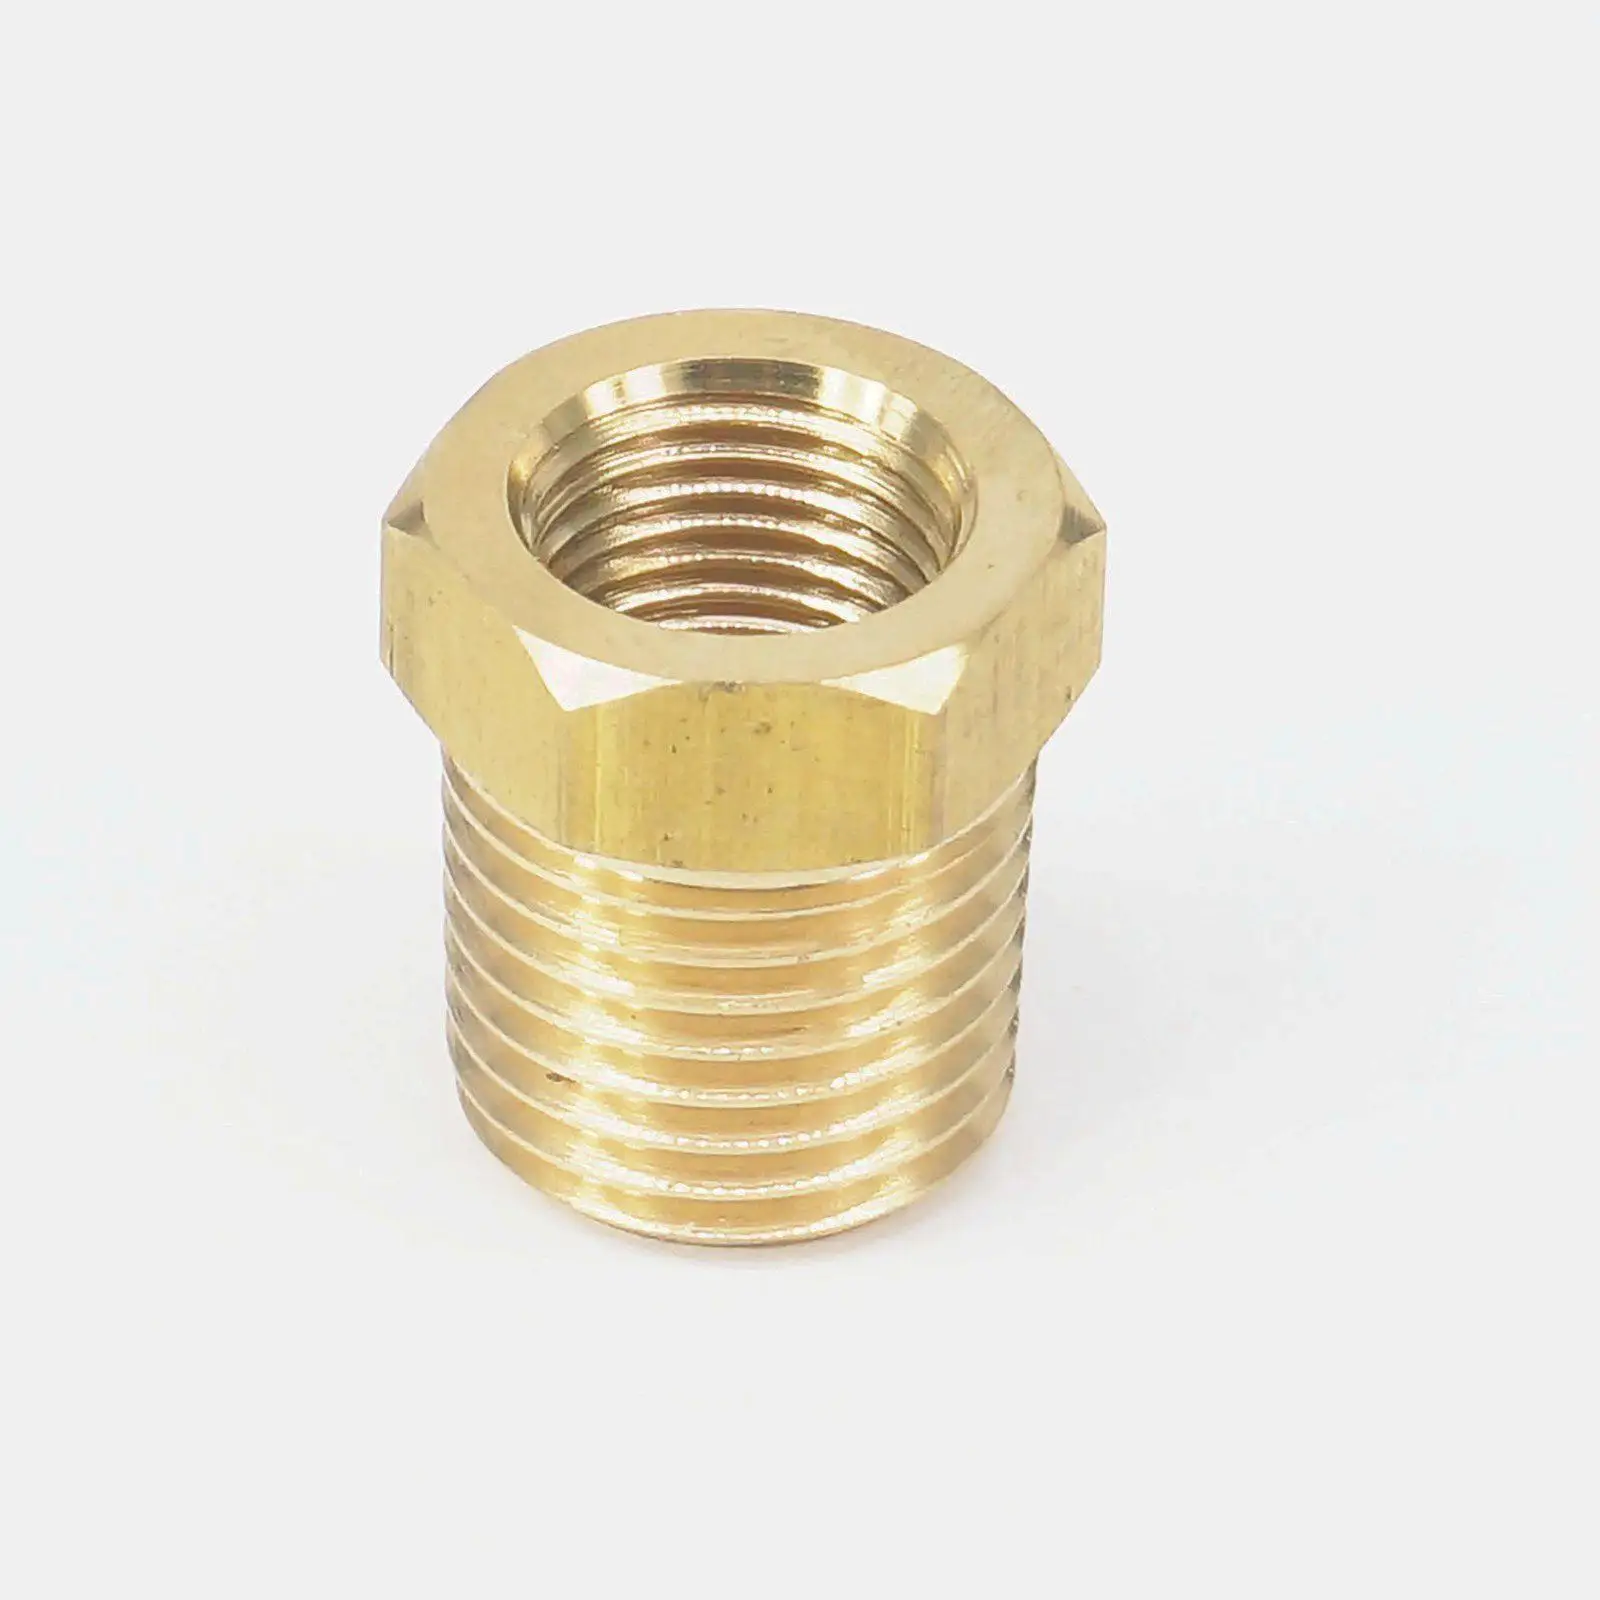 Brass Fitting for Air BSP Taper Thread x Hose Tail End Connector Water & Fuel 